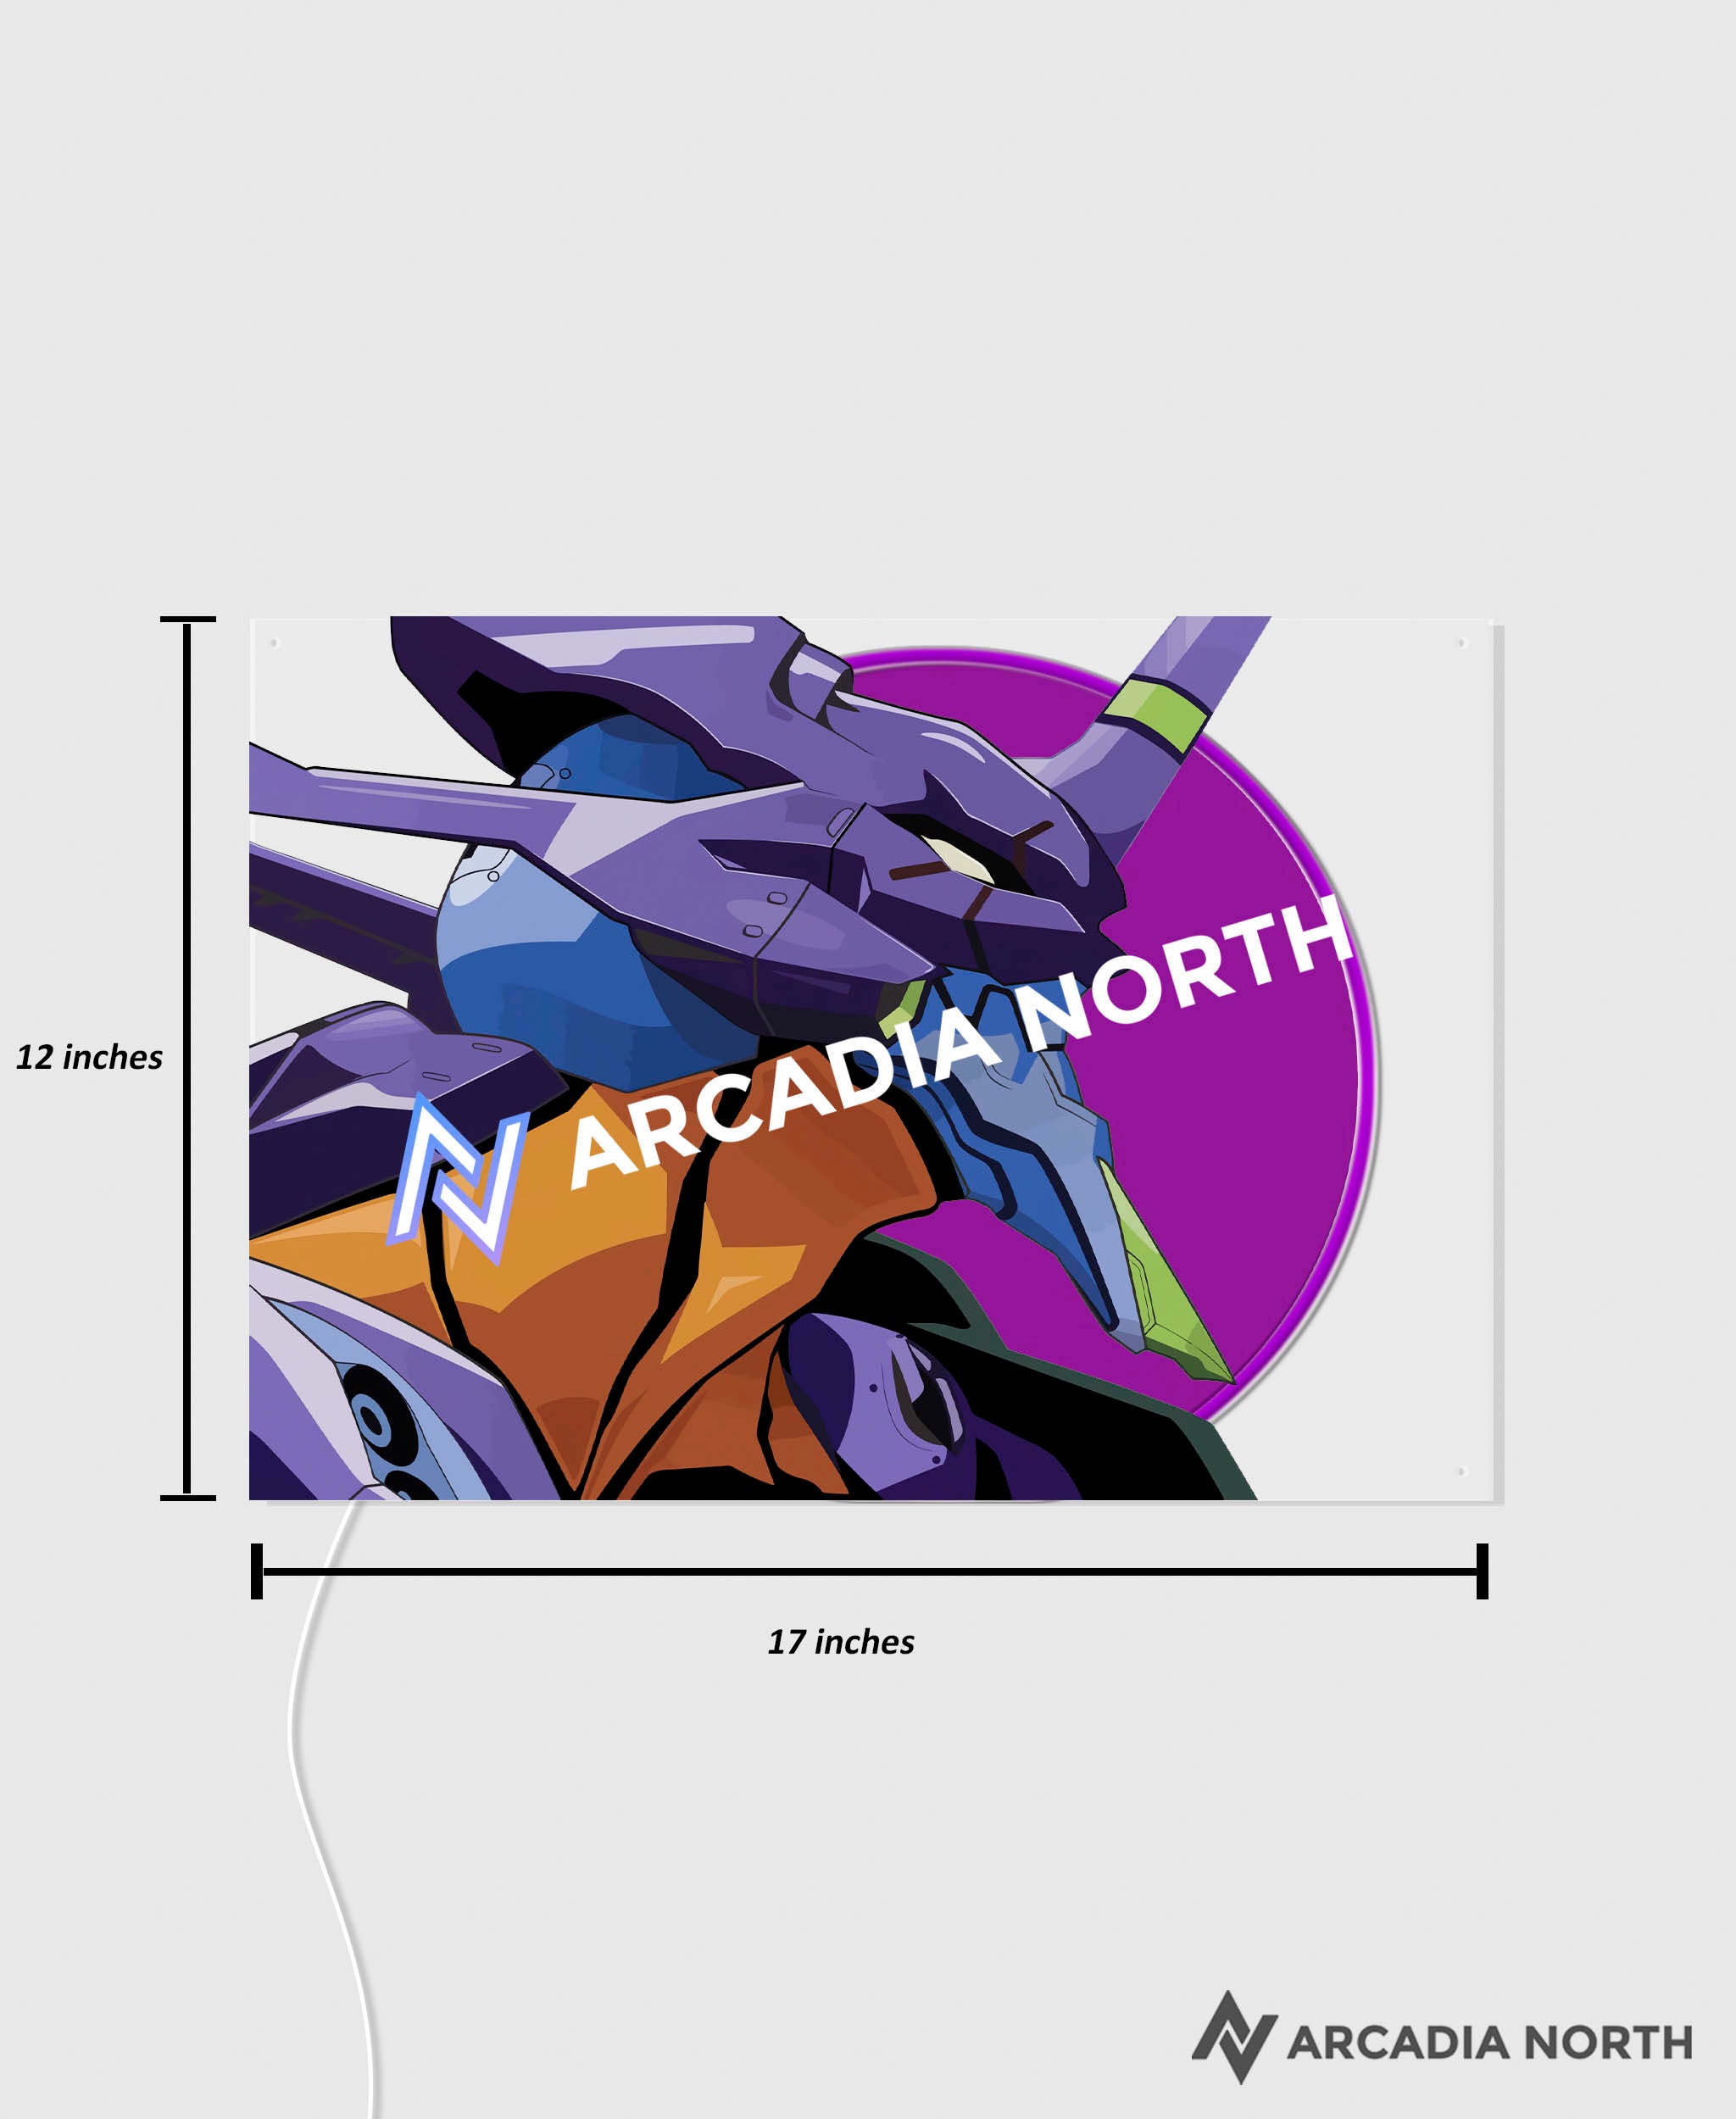 Arcadia North AURALIGHT Original LED Poster featuring the anime Neon Genesis Evangelion with Evangelion Unit-01 or Eva-01 illuminated by glowing neon LED lights. UV-printed on acrylic.